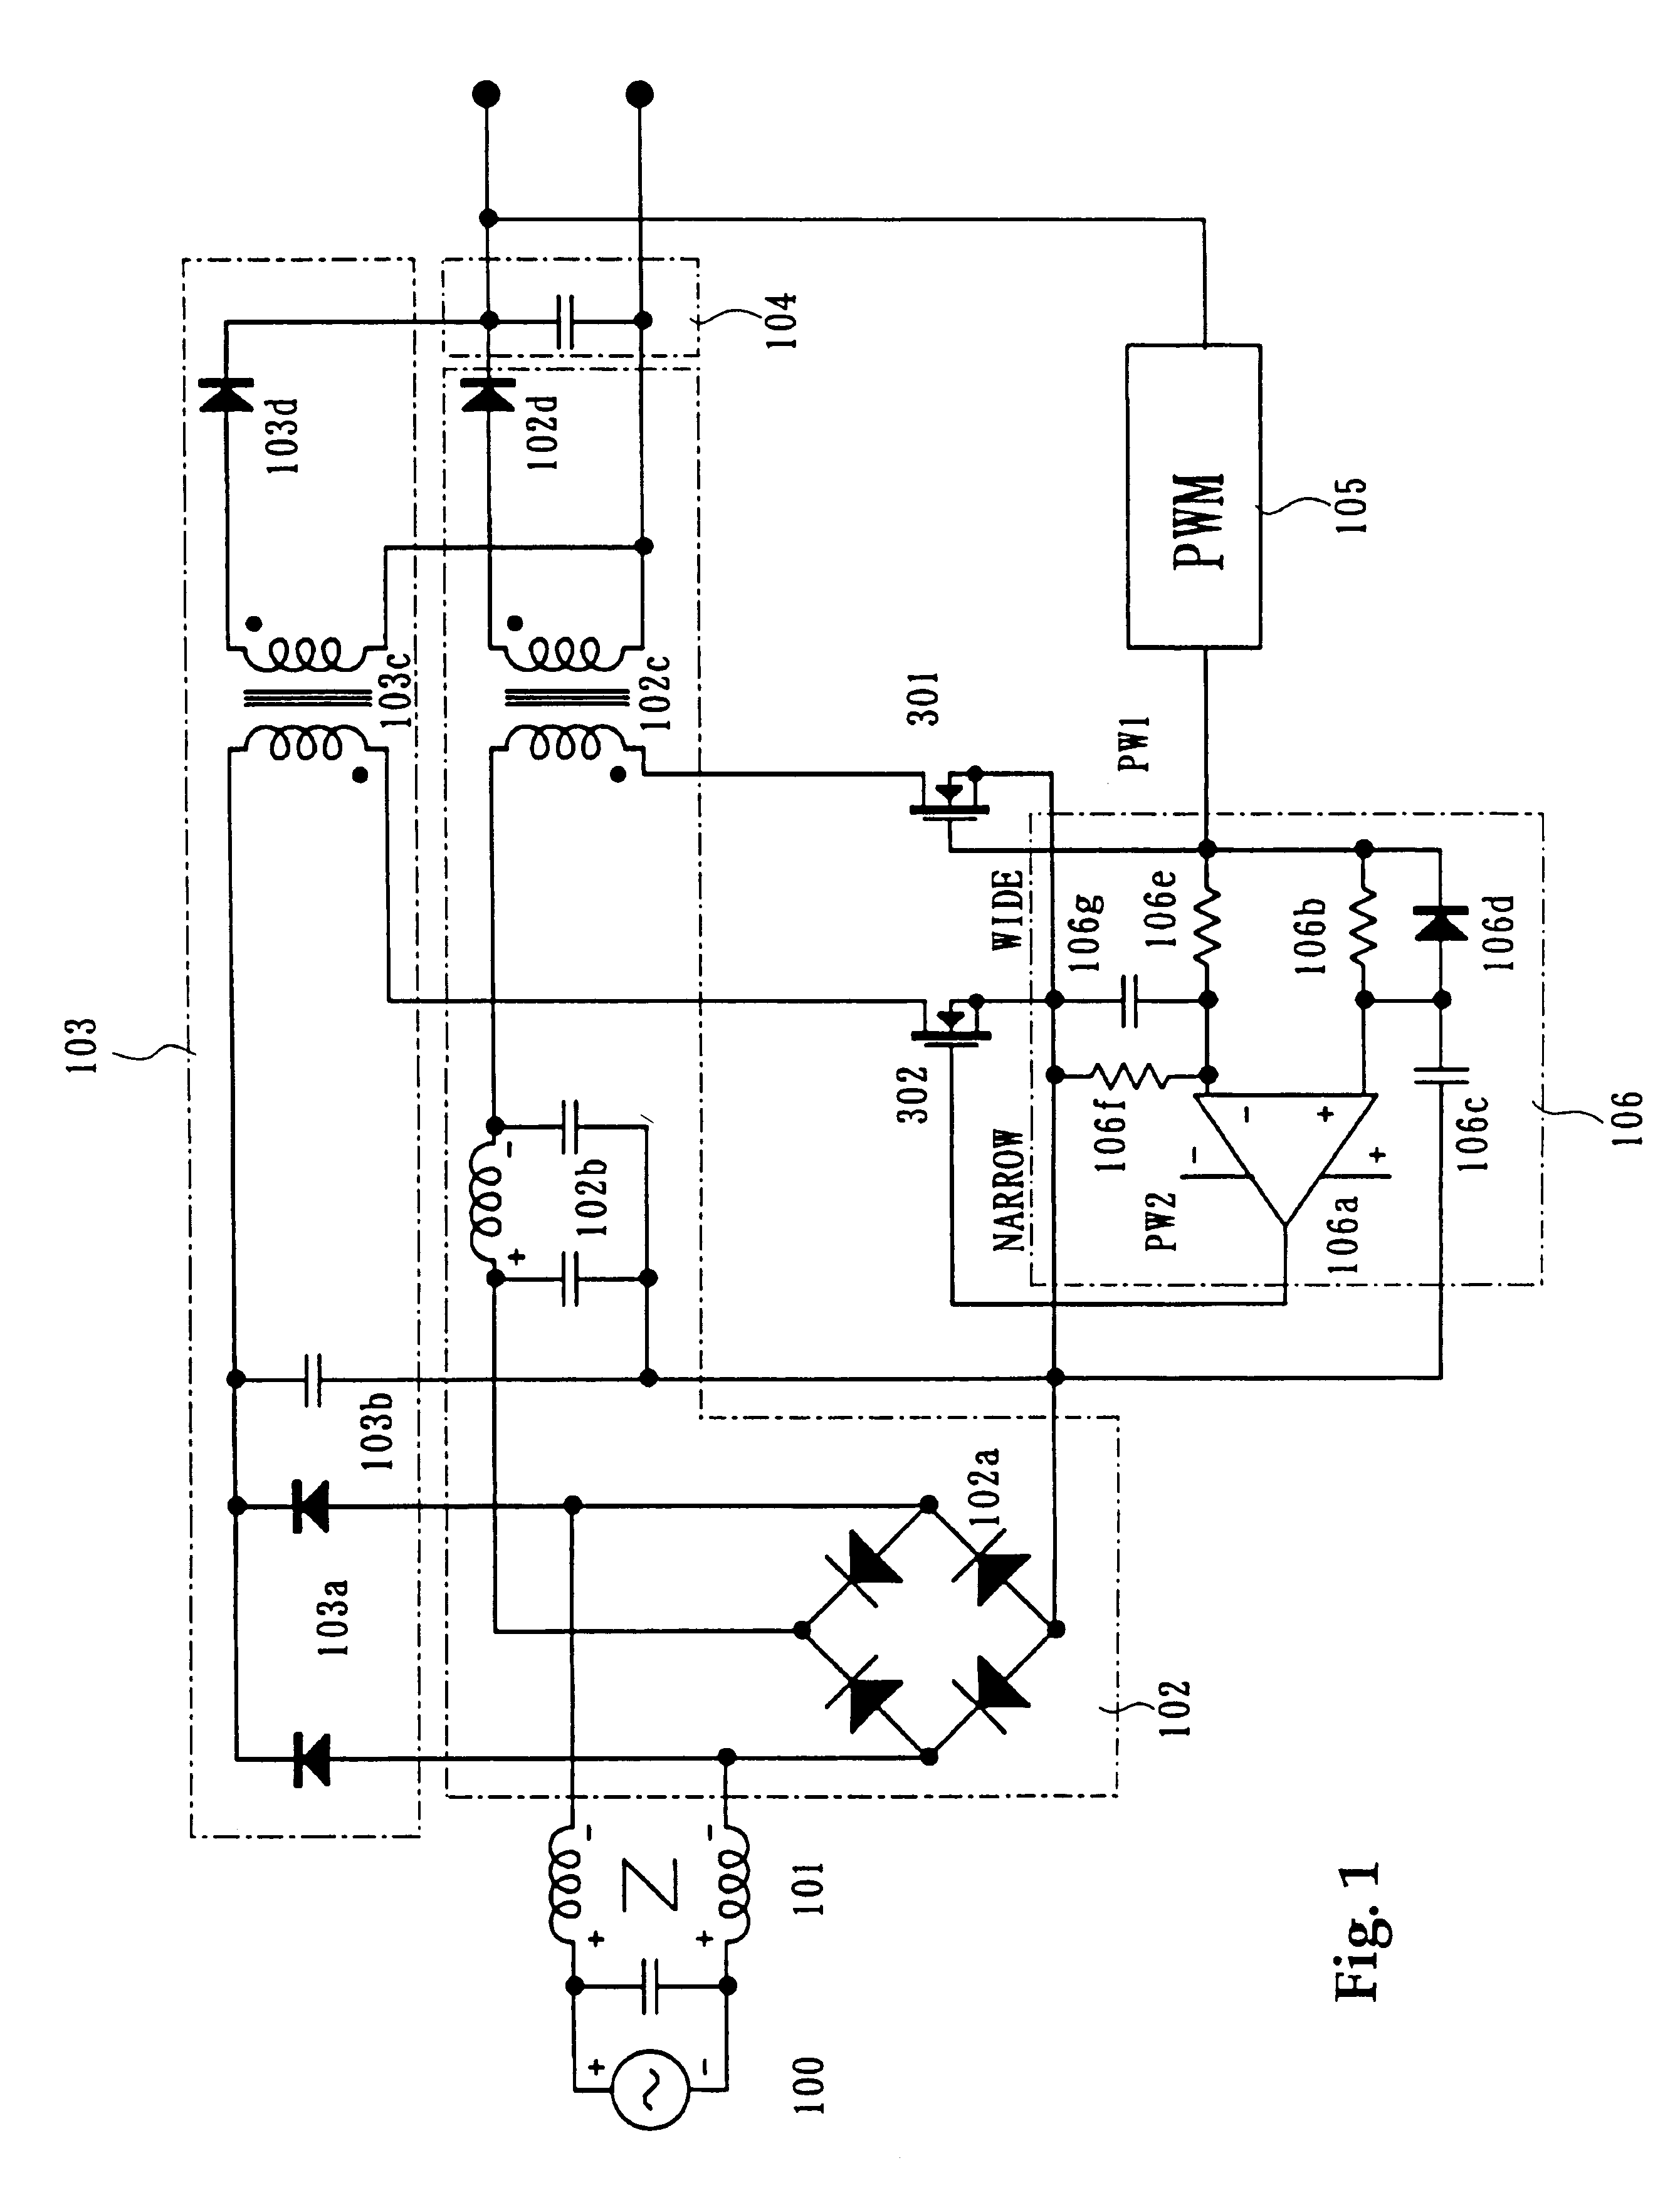 Single phase AC-DC converter having a power factor control function